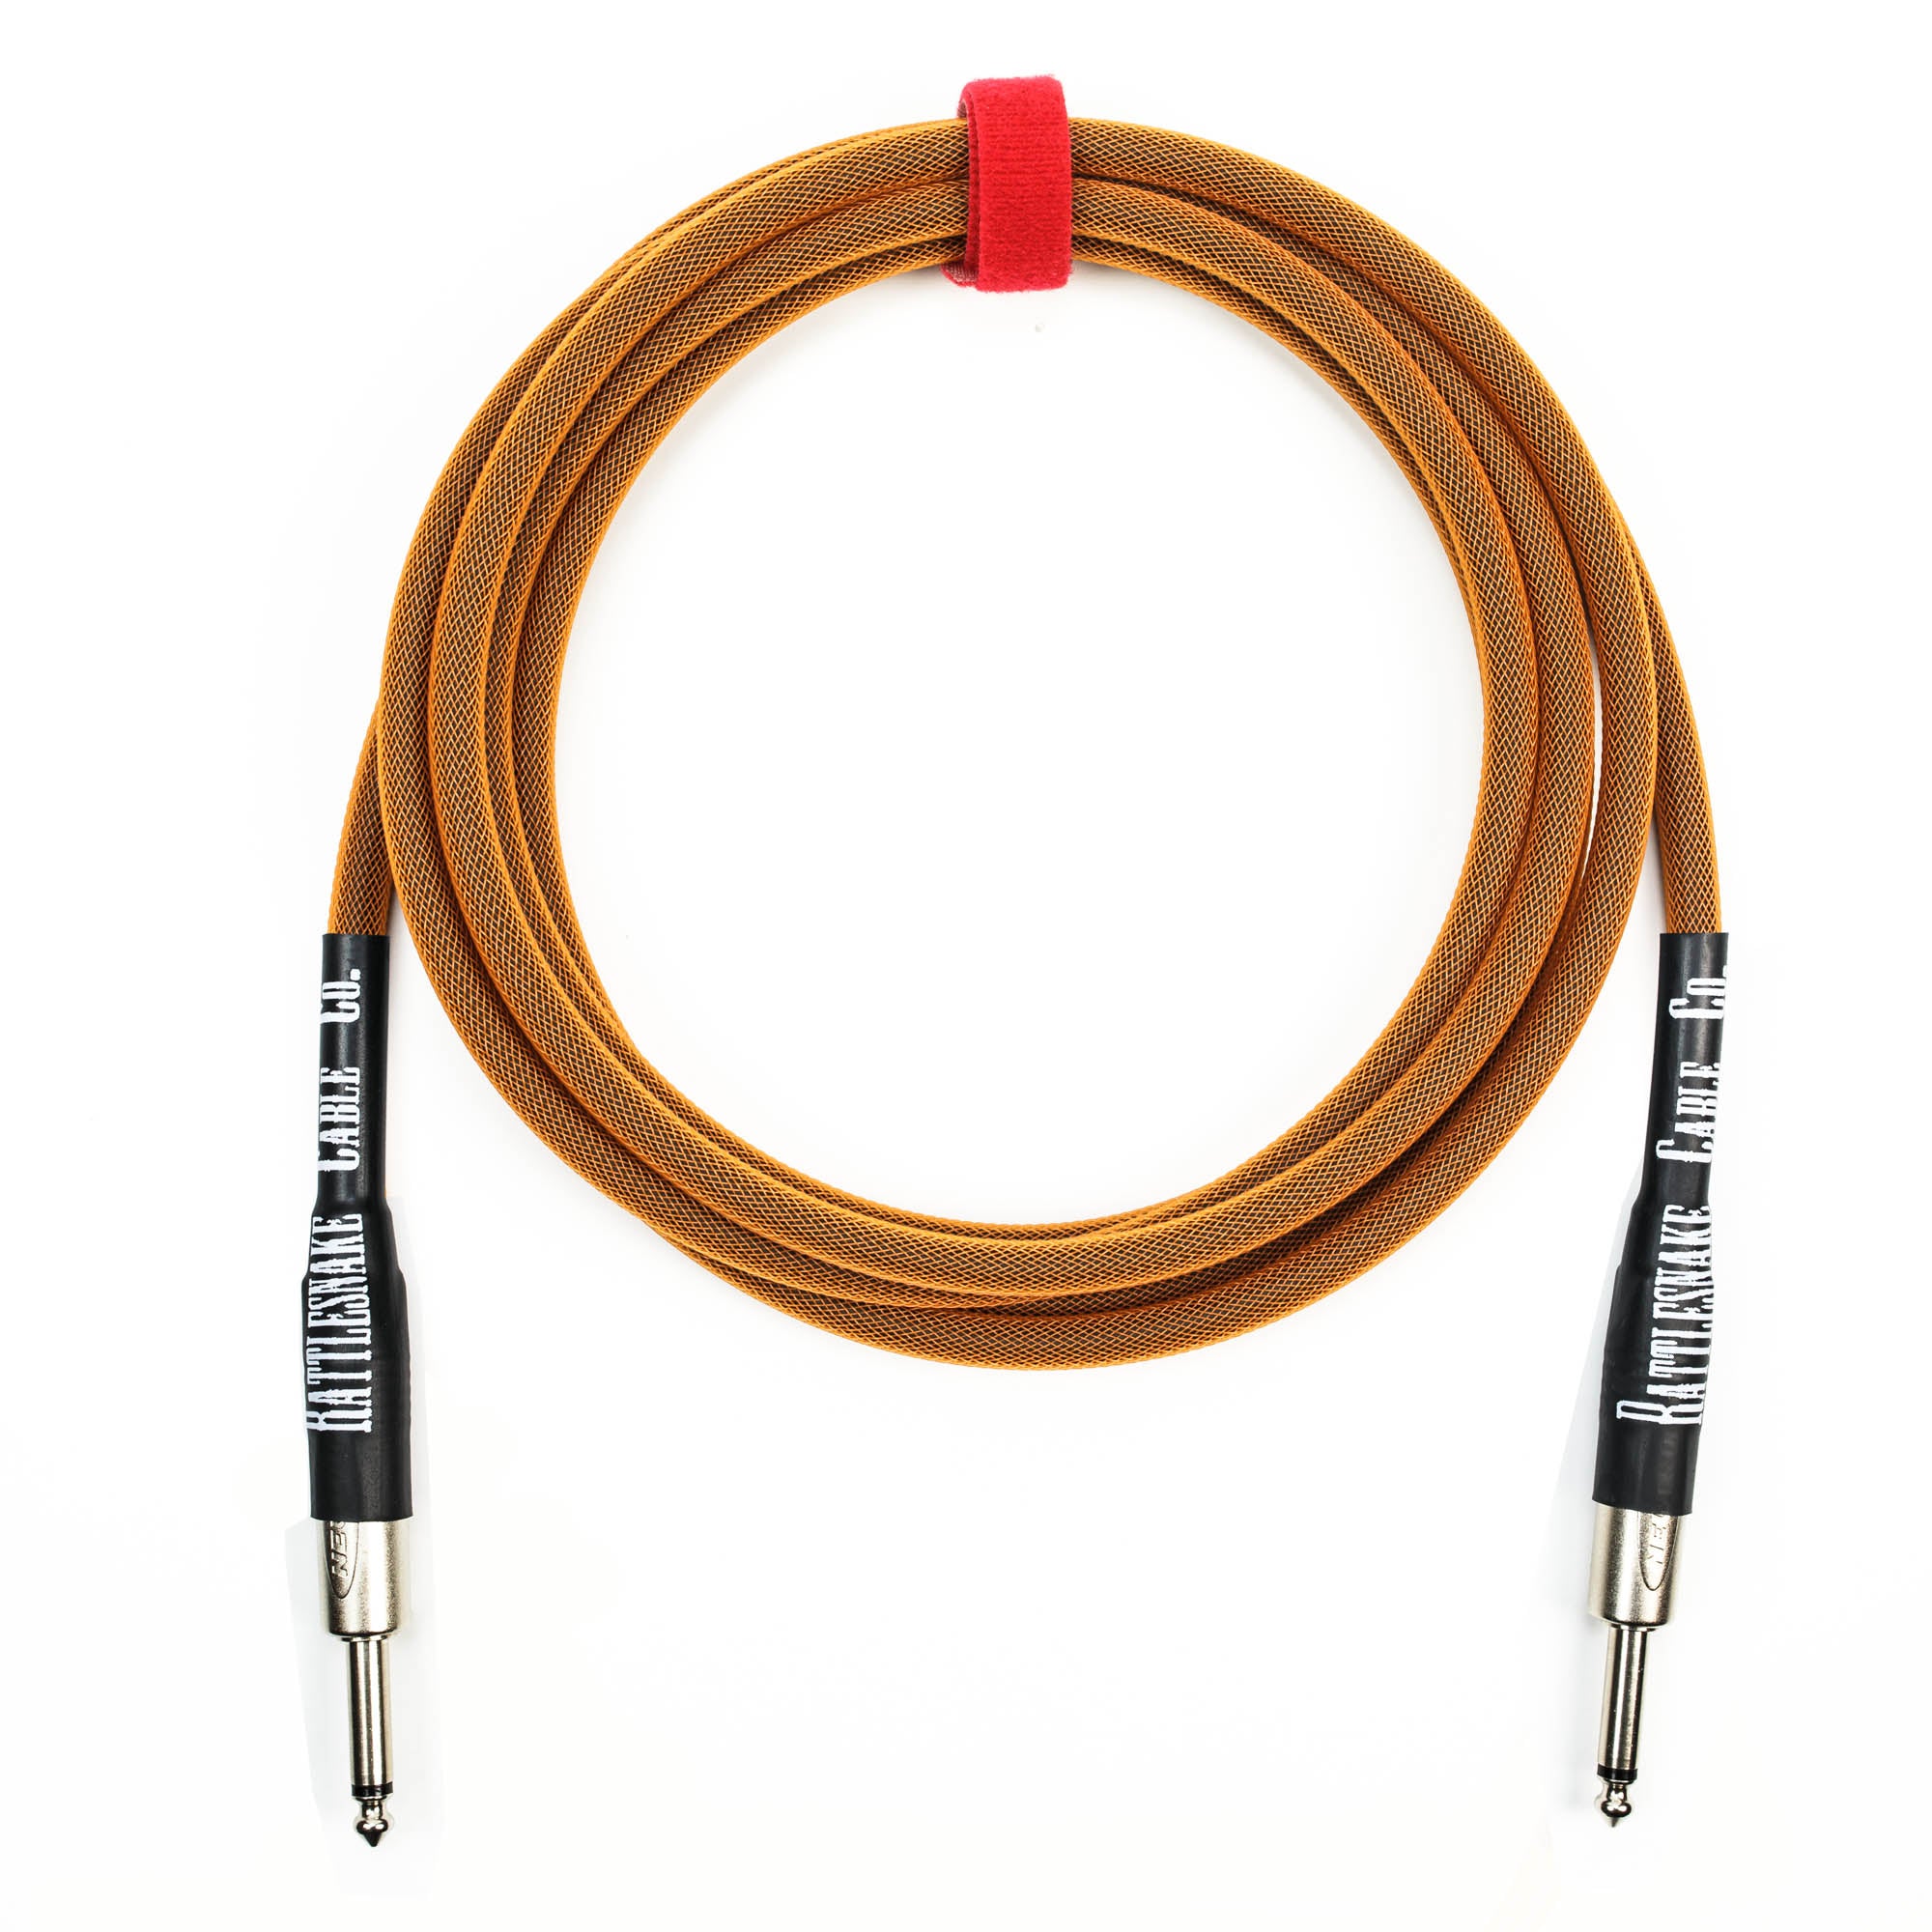 Rattlesnake Cable Company 10' Copper Guitar Cable - Straight Plugs